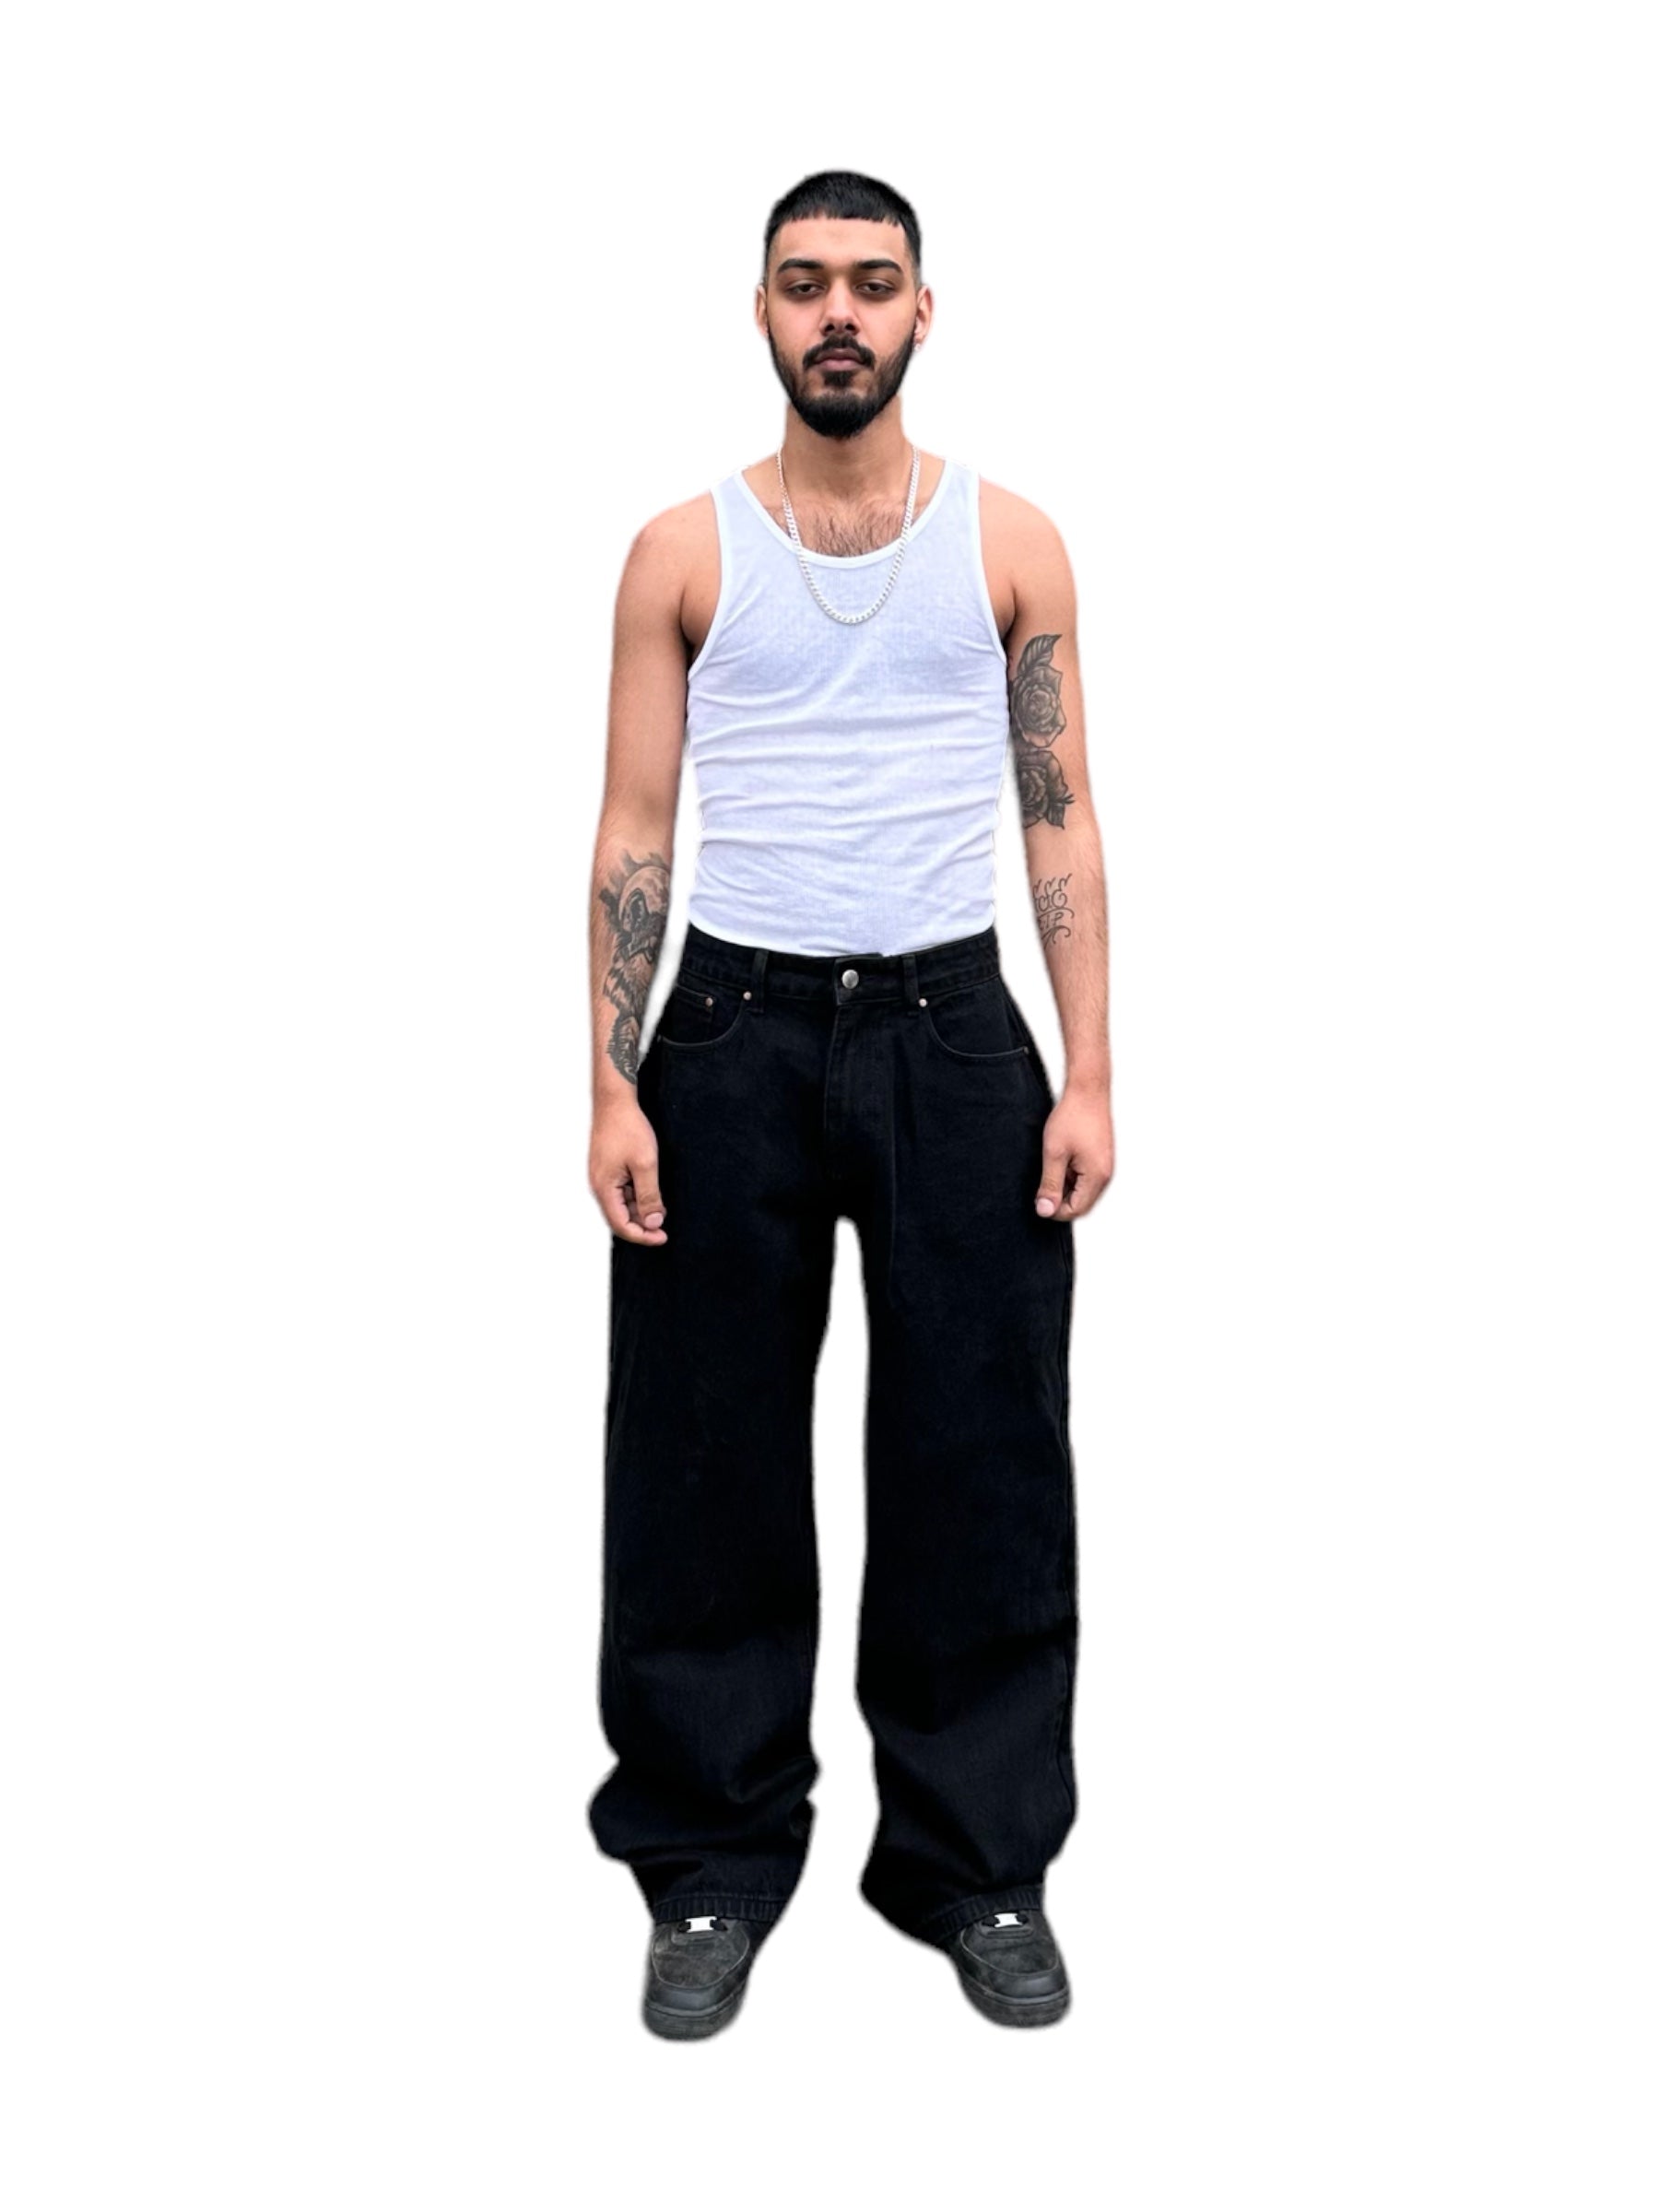 52 NMJ BAGGY JEANS 28x35 (PREMADE 1-2 DAYS TO SHIP) – NO MORE JUSTICE